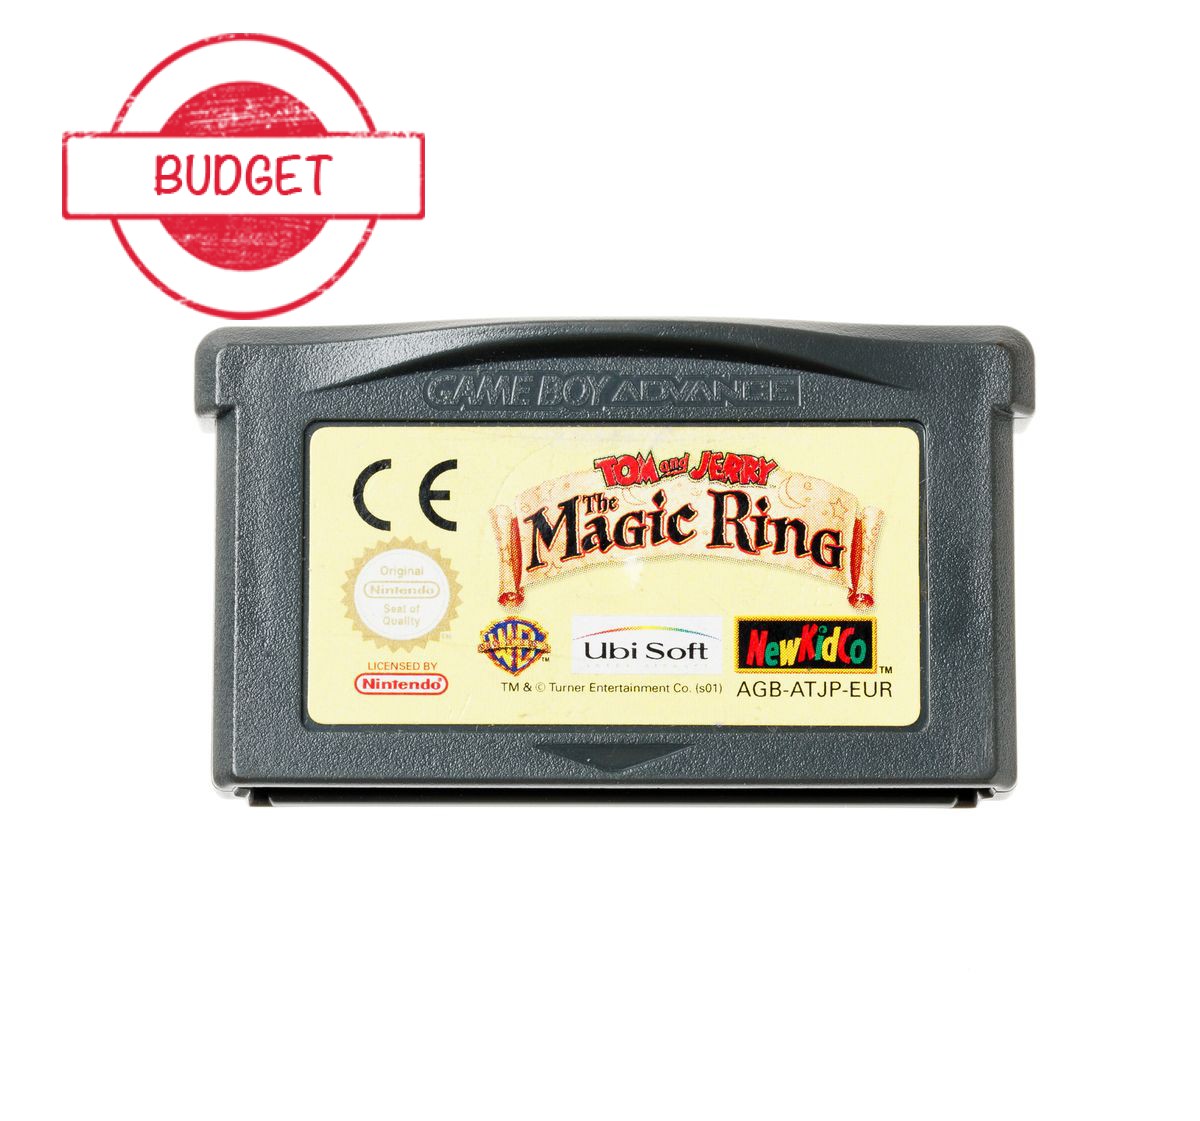 Tom and Jerry: The Magical Ring - Budget - Gameboy Advance Games